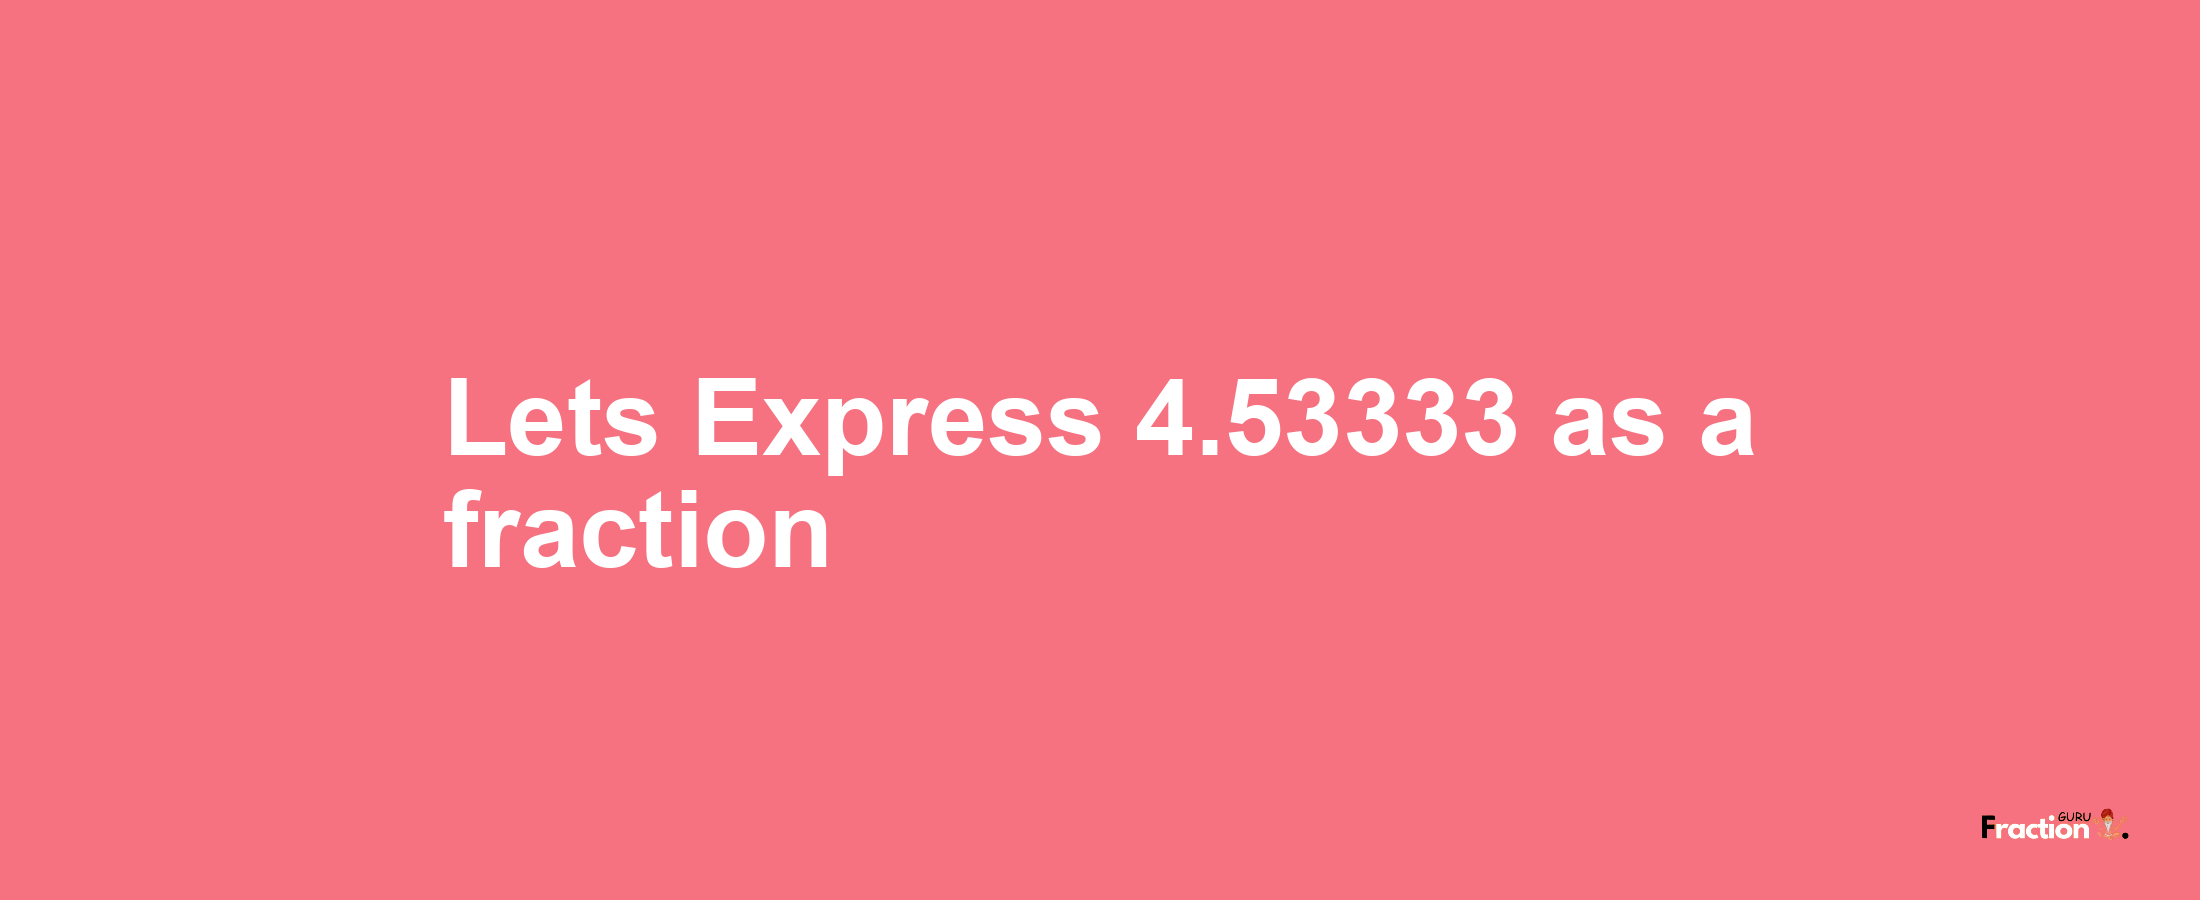 Lets Express 4.53333 as afraction